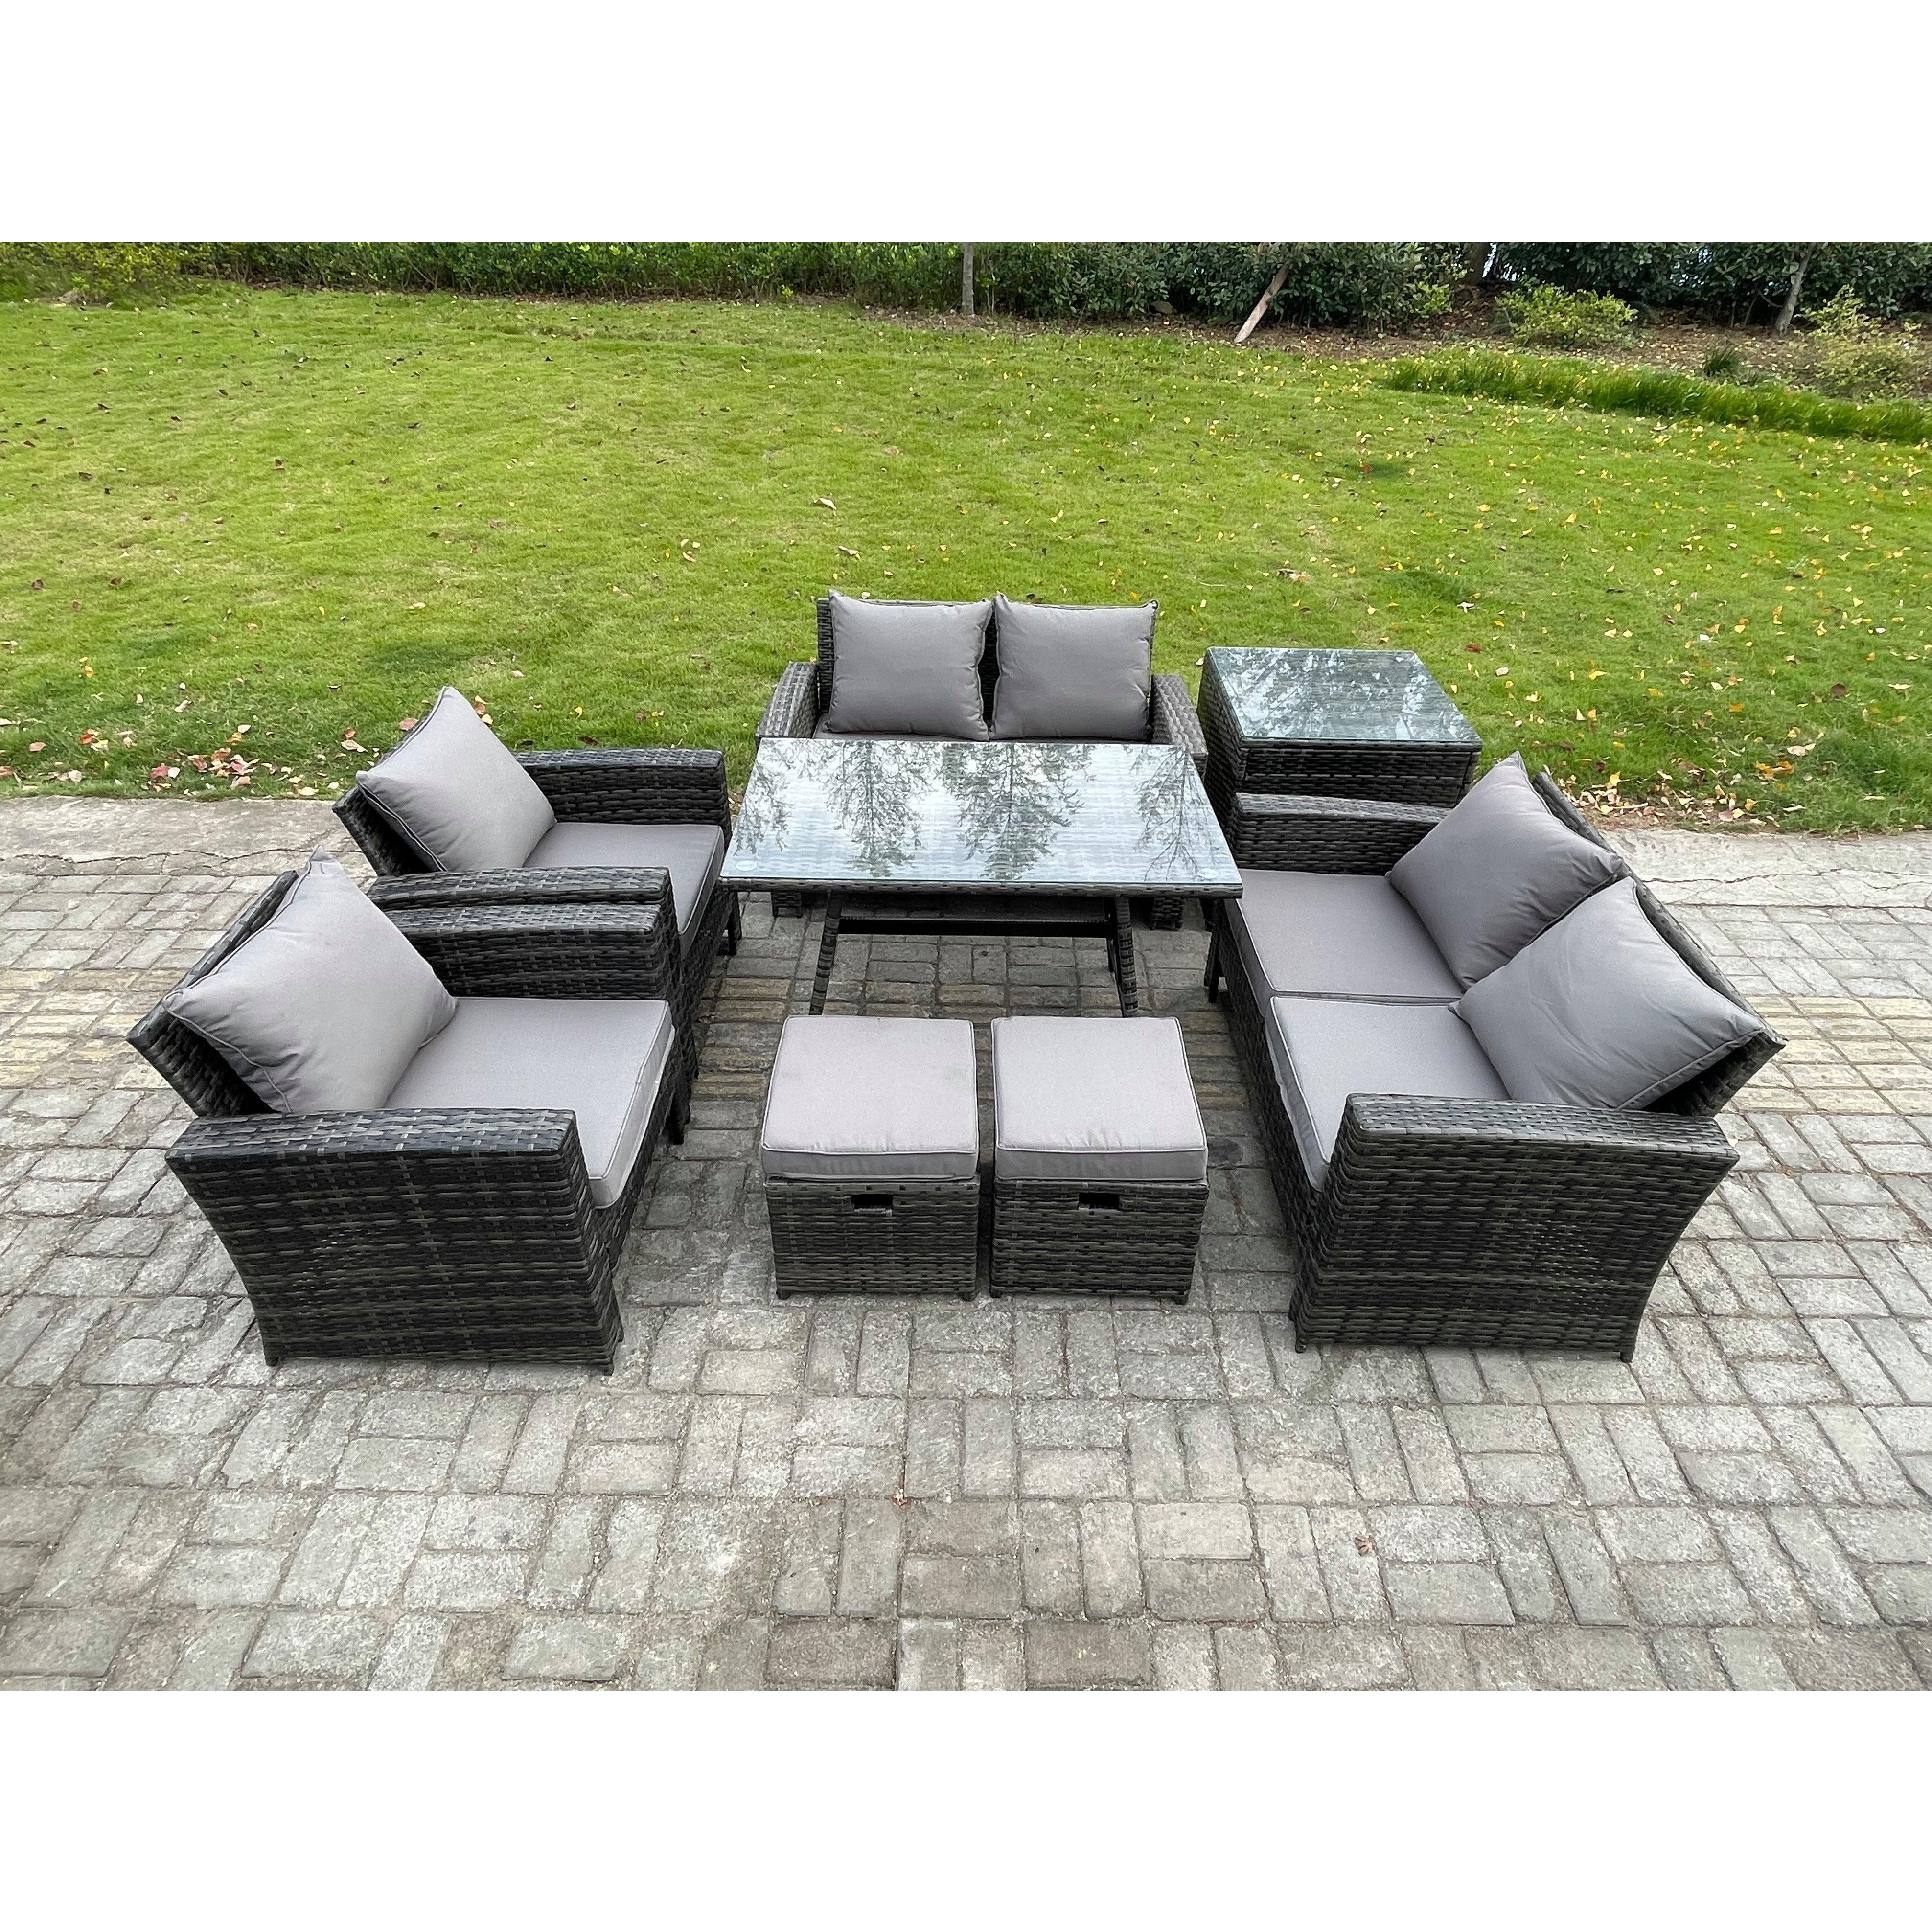 Rattan Garden Furniture Set 8 Seater Patio Outdoor Lounge Sofa Set with Rectangular Dining Table Love Seat Sofa Side Table - image 1